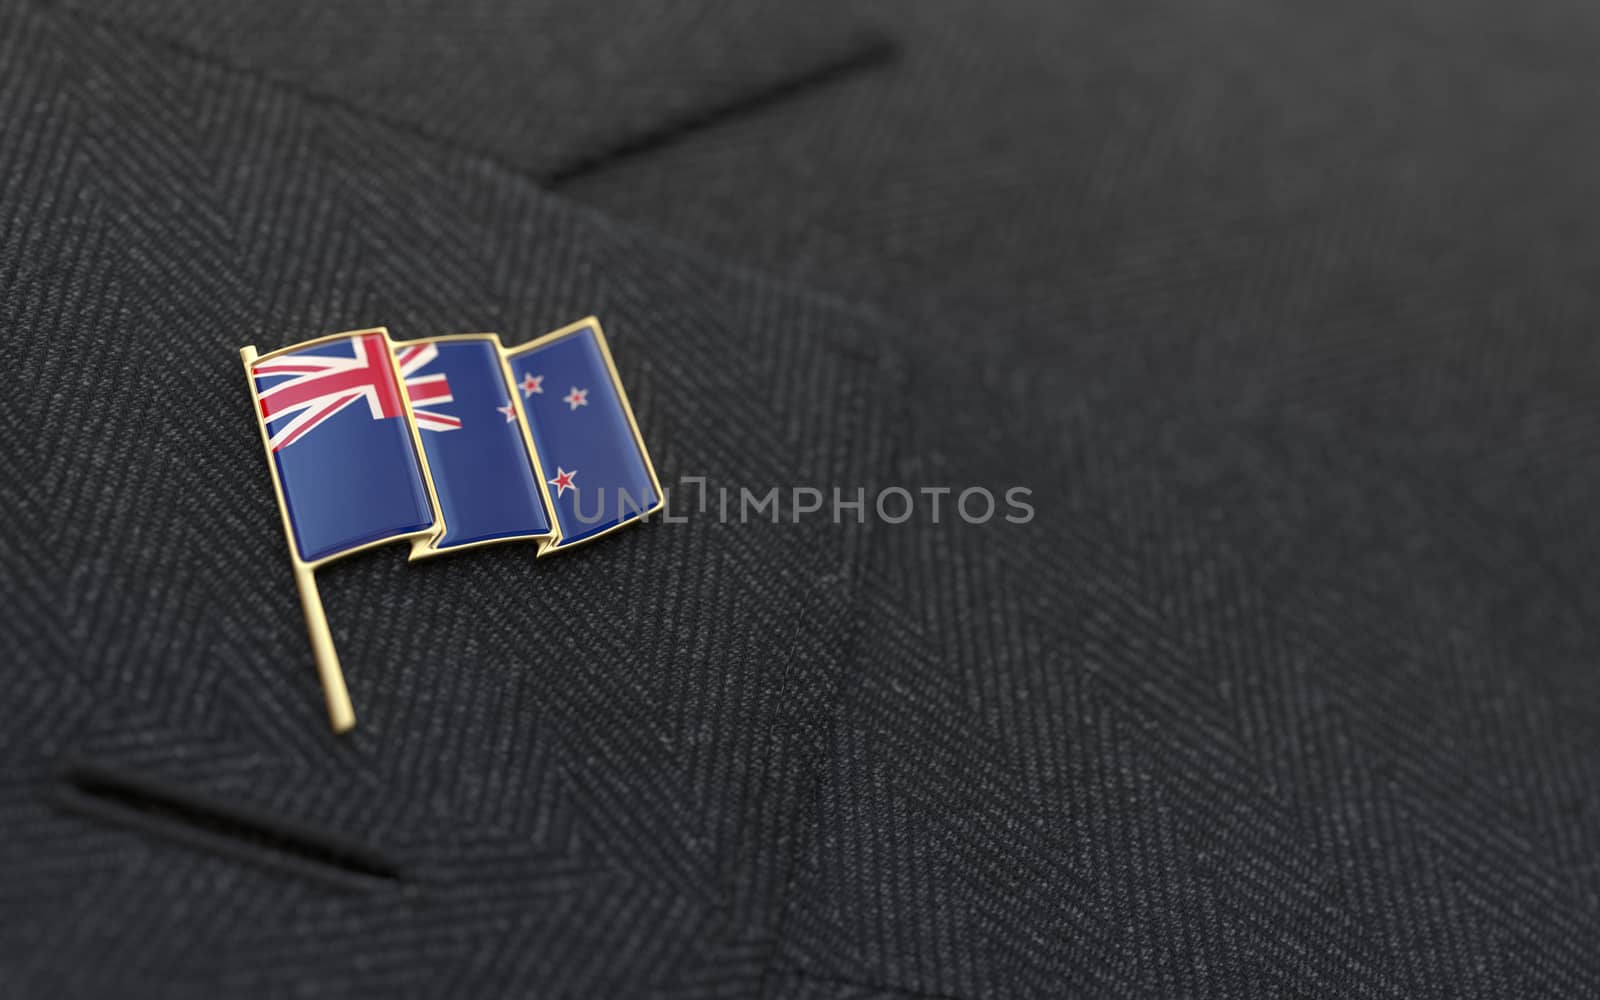 New Zealand flag lapel pin on the collar of a business suit jacket shows patriotism